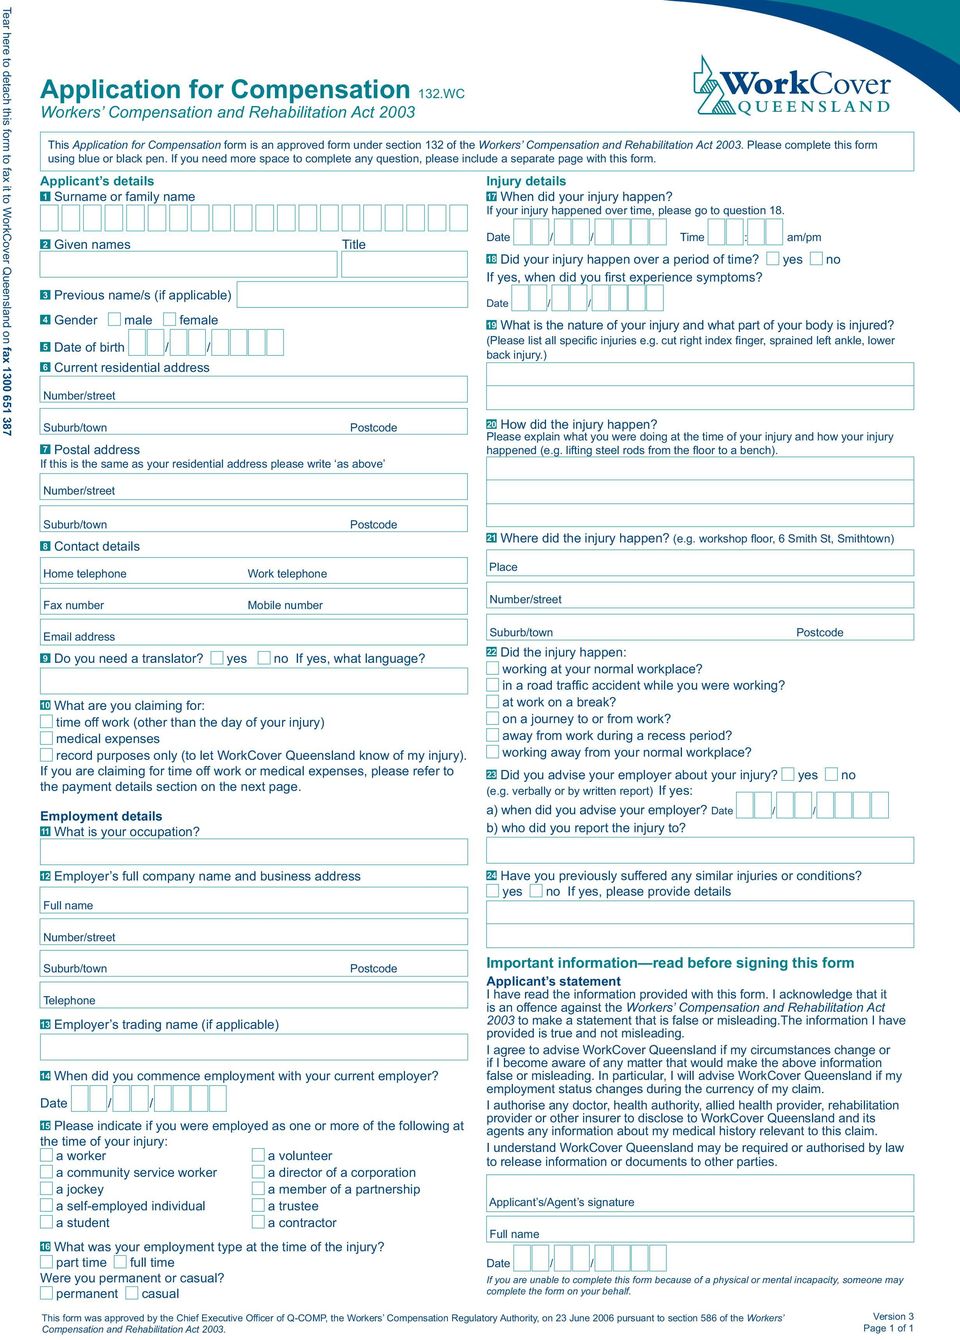 Please complete this form using blue or black pen. If you need more space to complete any question, please include a separate page with this form.